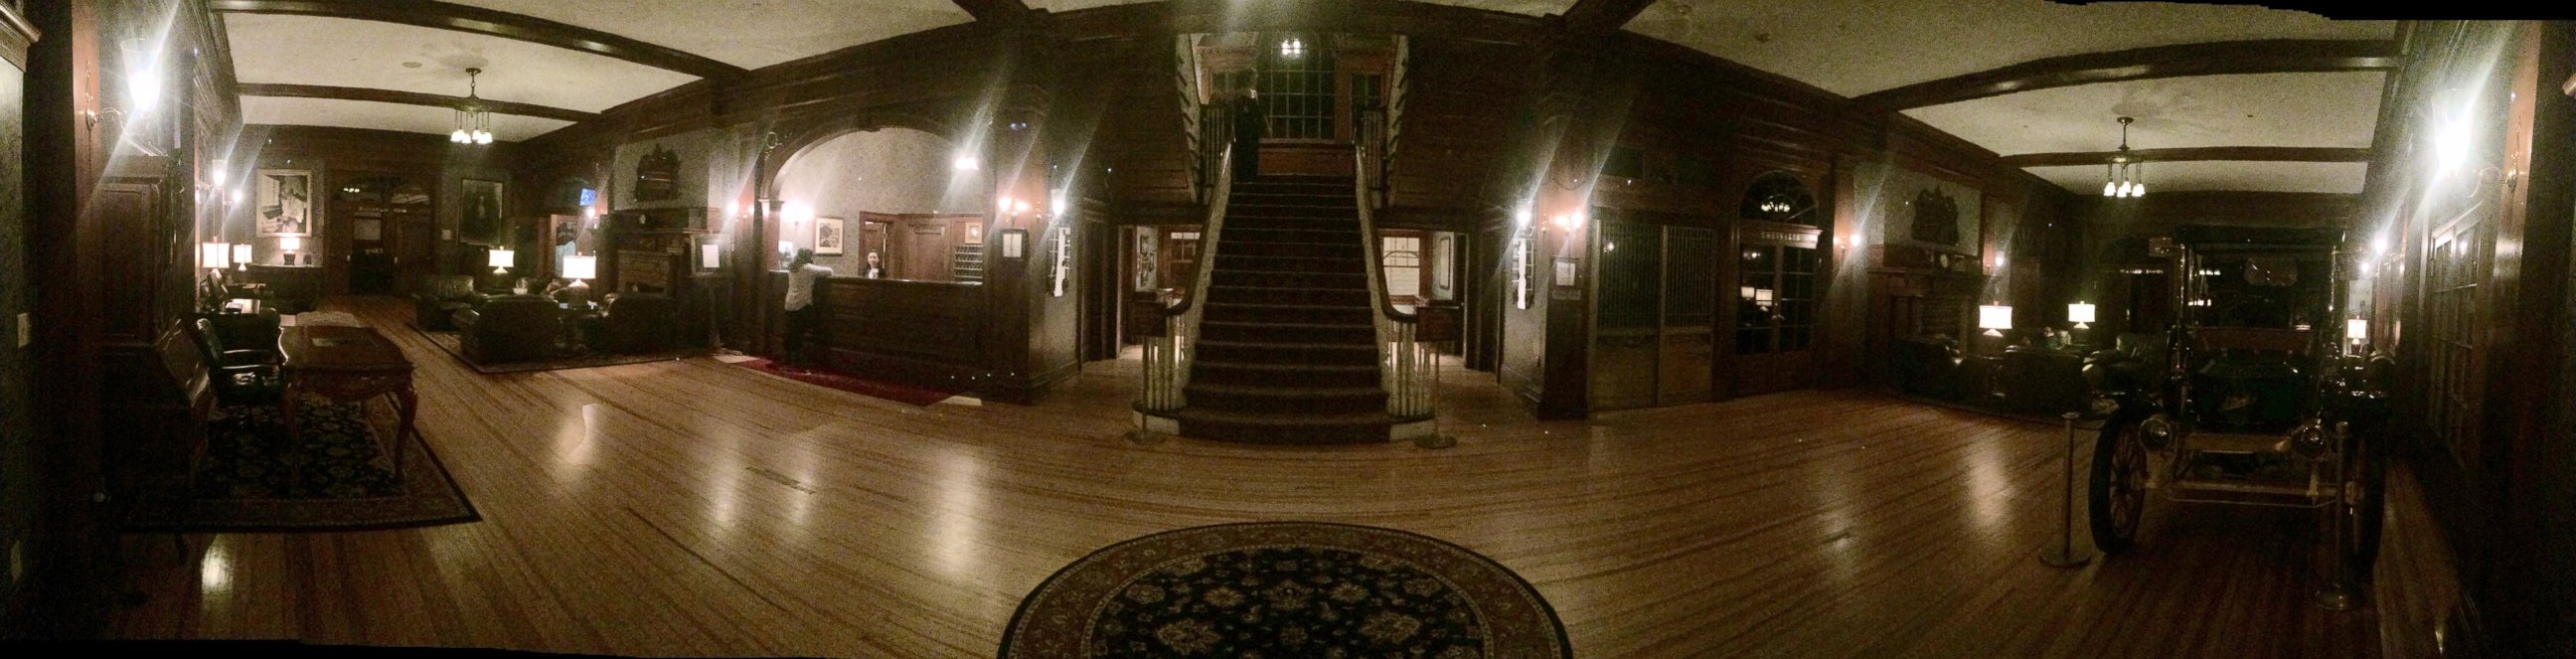 PHOTO: Henry Yau captured this creepy photo on a visit to The Stanley Hotel, made famous by Steven King's The Shining. 
